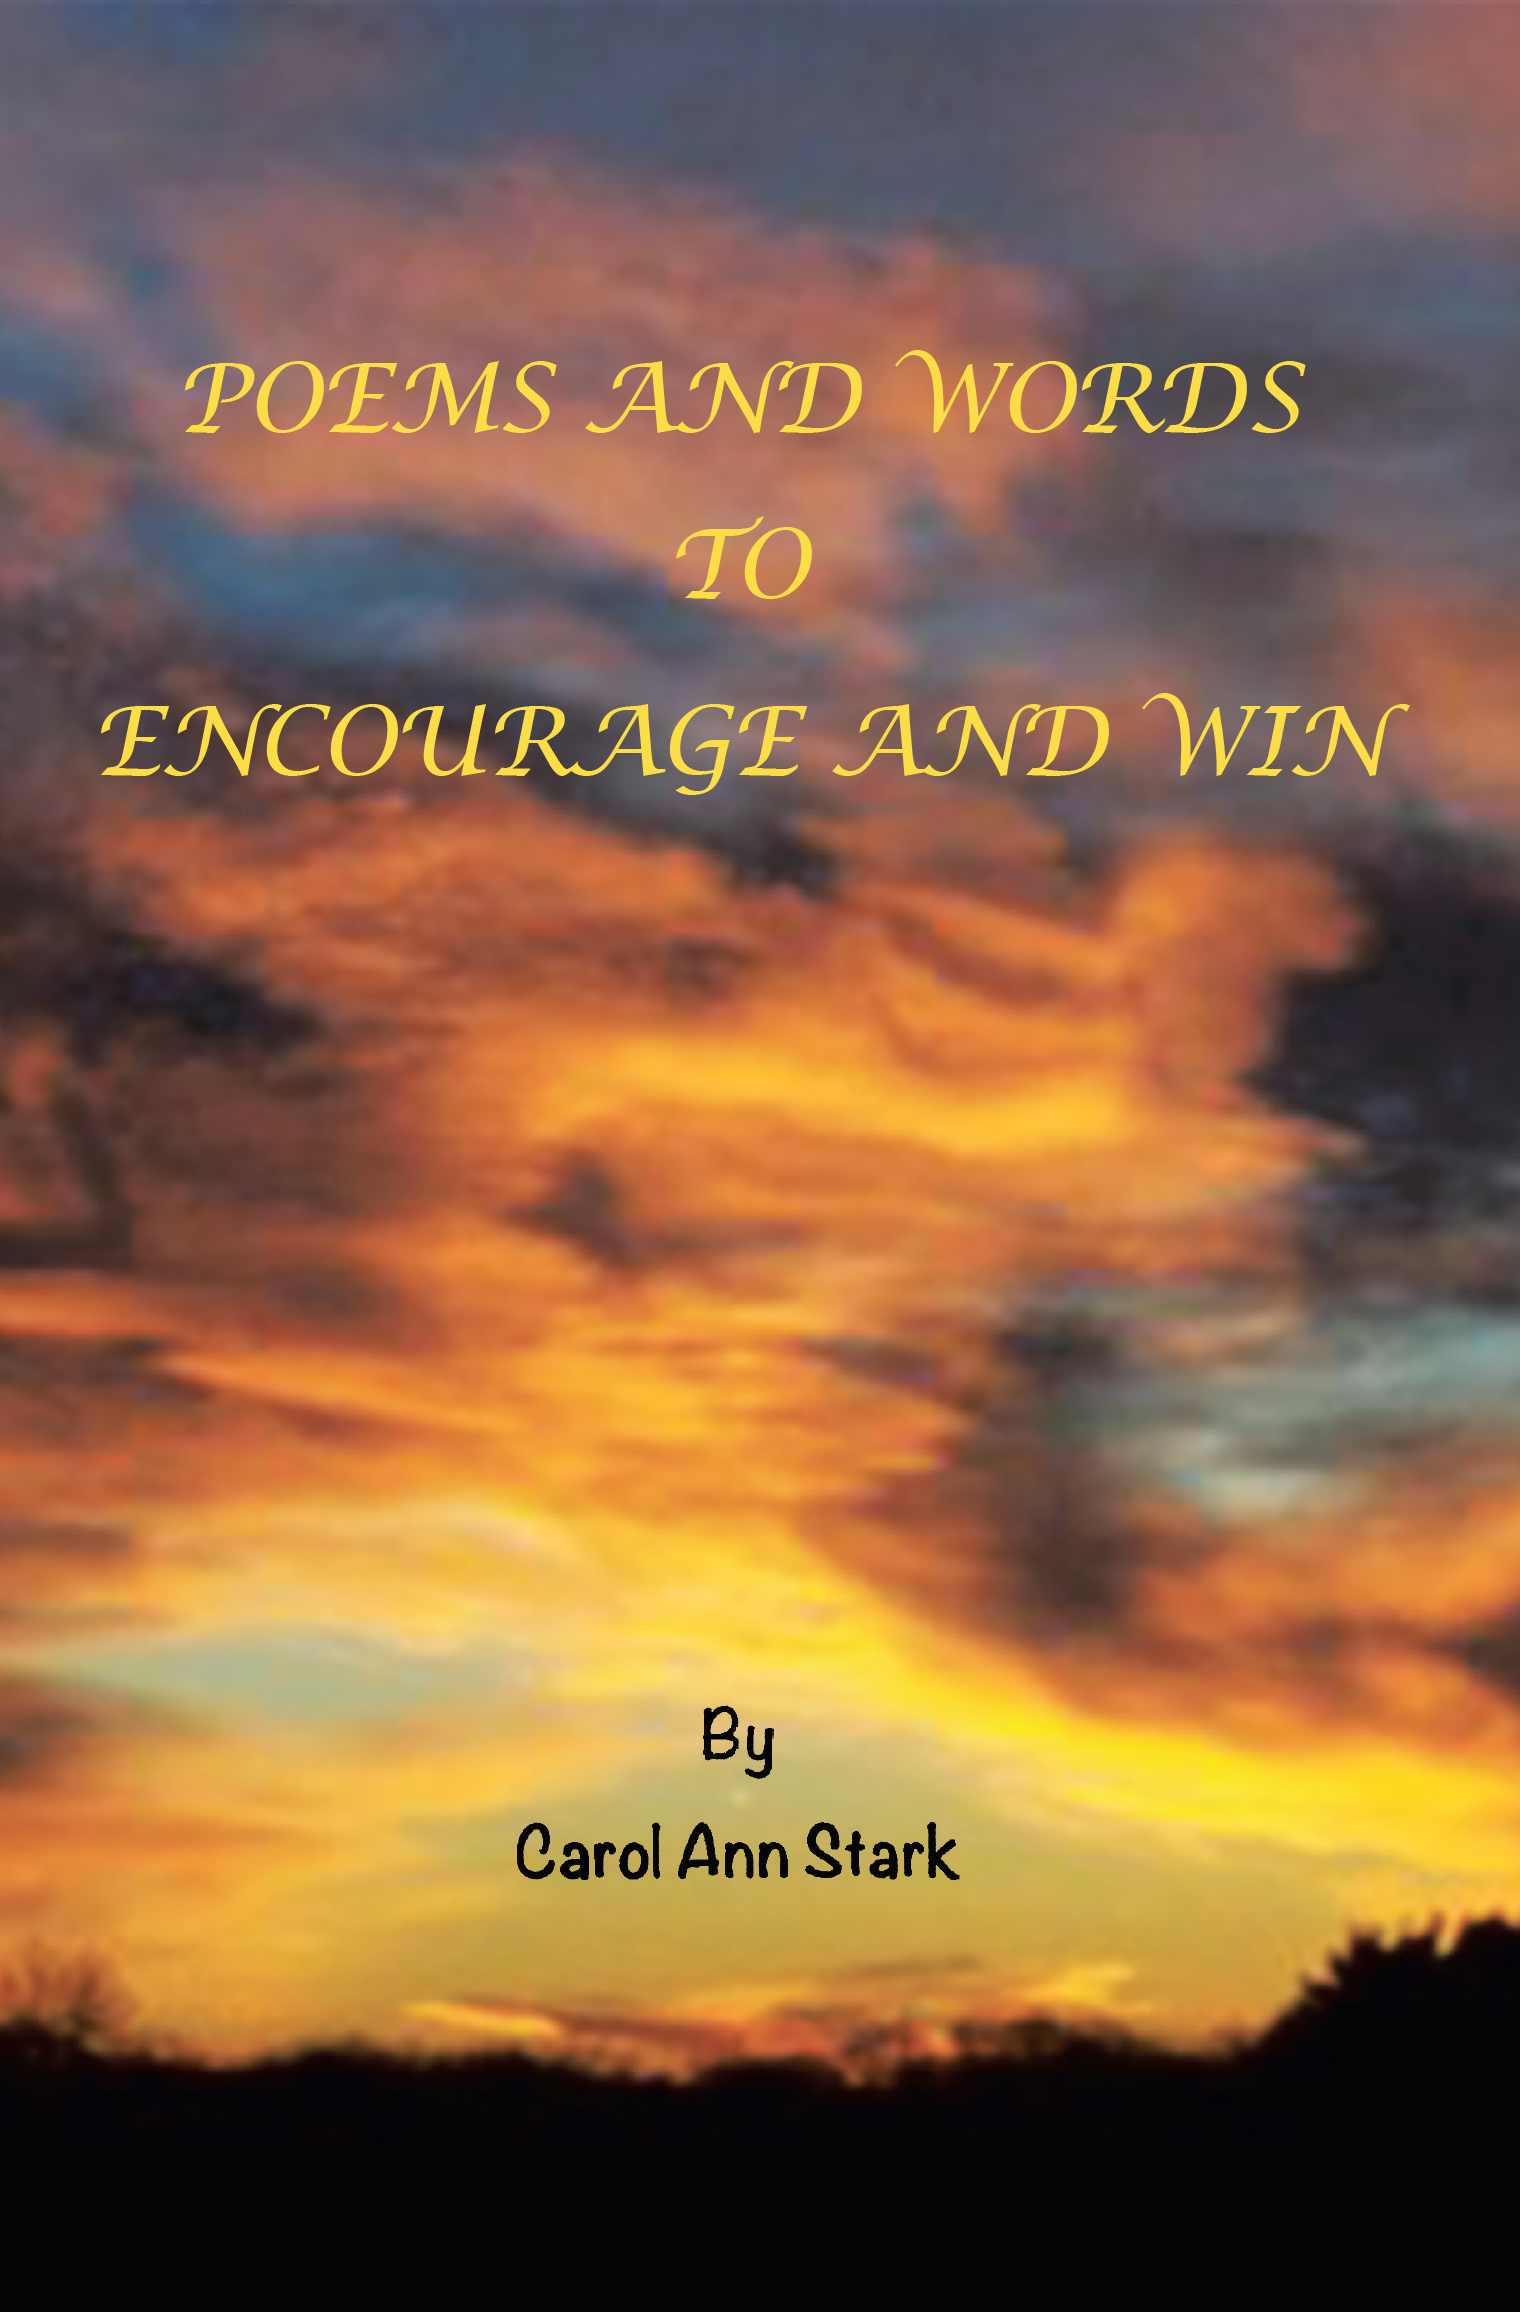 Author Carol Ann Stark’s New Book, "Poems and Words to Encourage and Win," is a Powerful Series Encouraging Readers to Develop Their Faith and Relationship with Christ